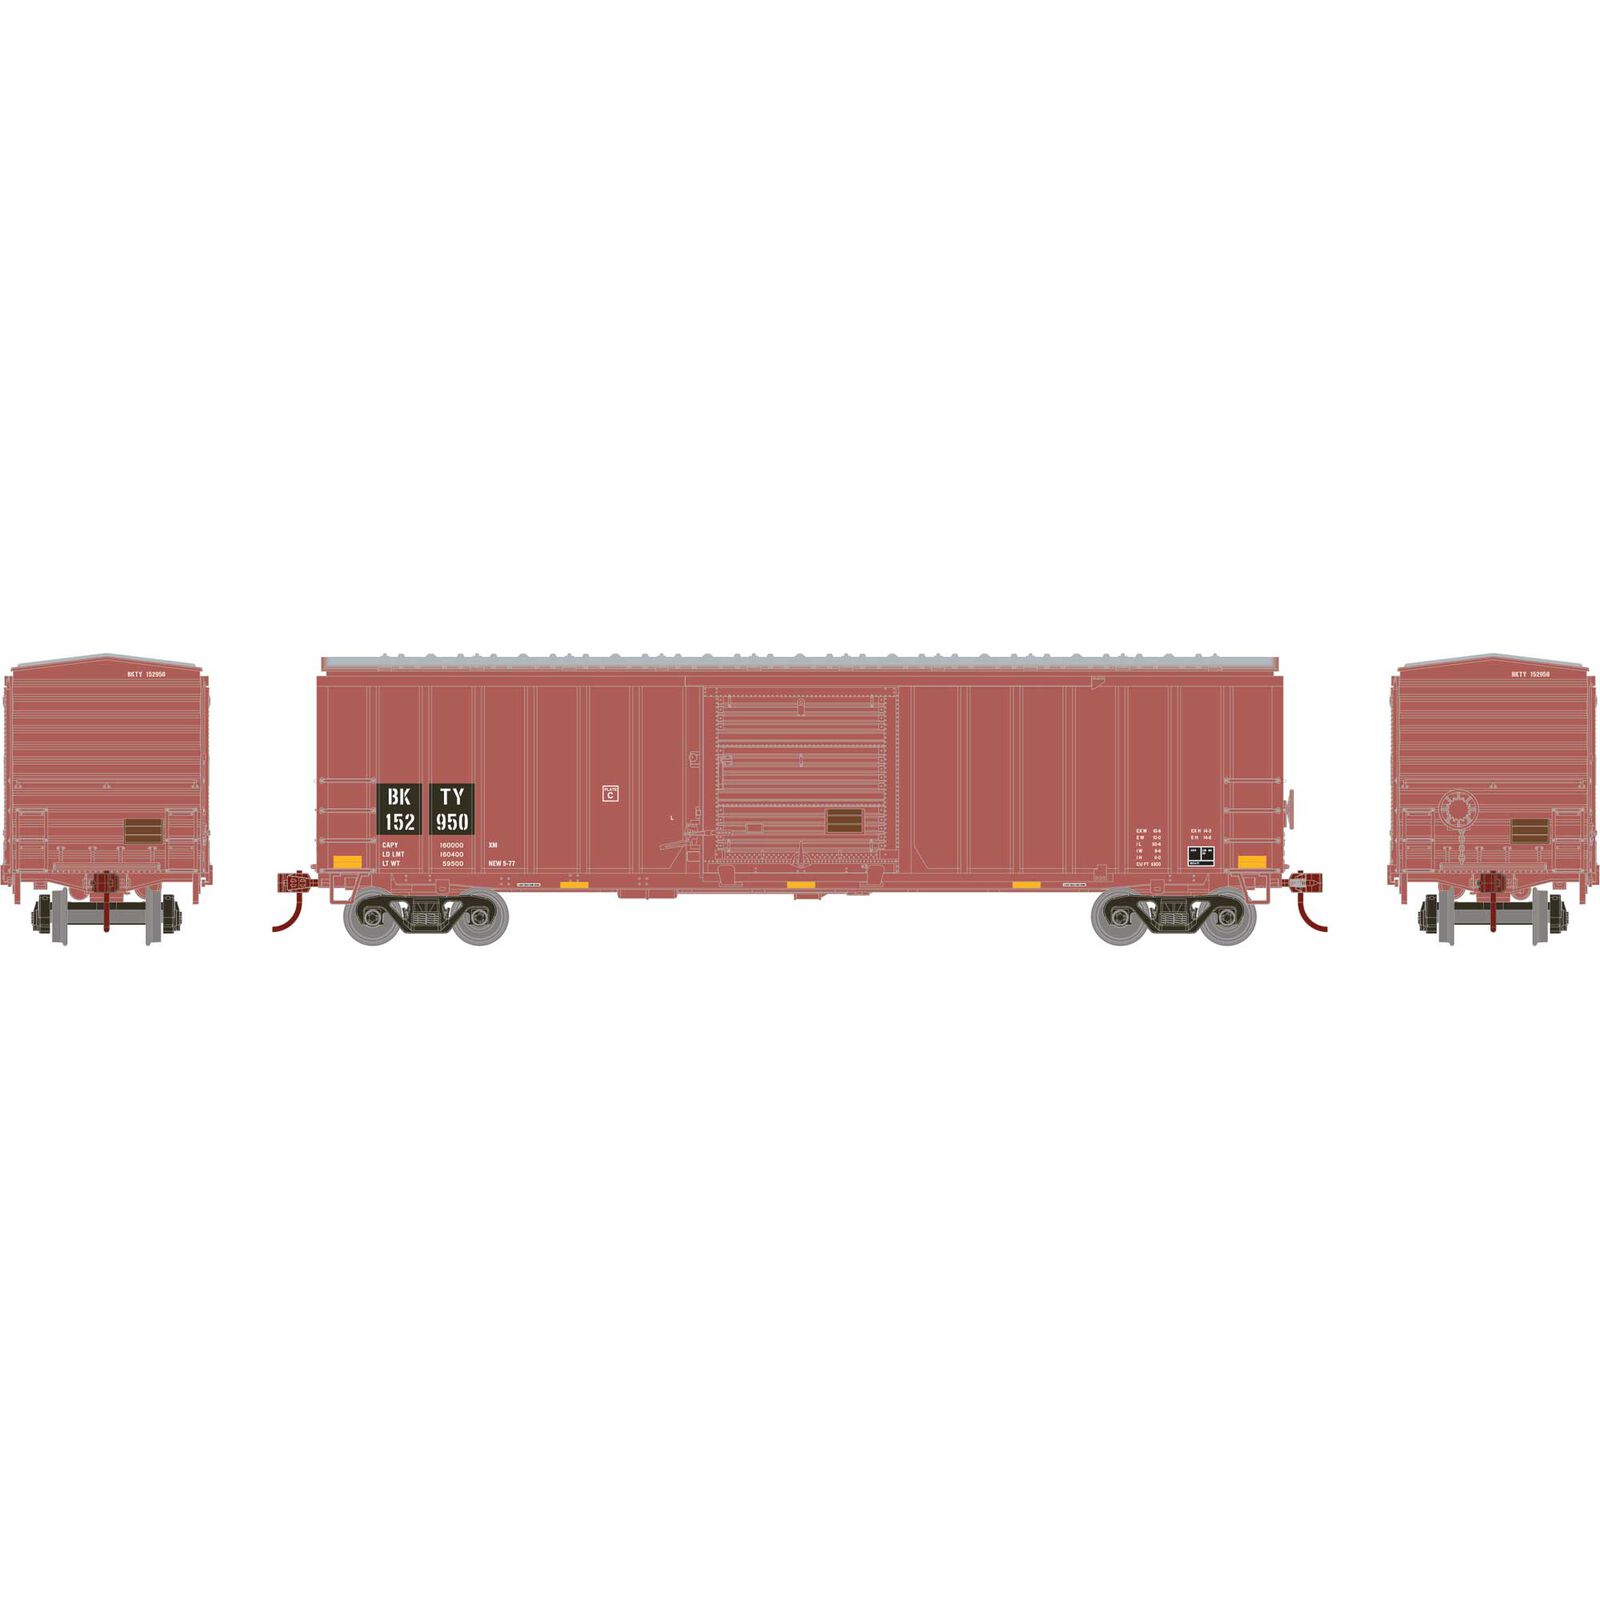 HO 50' ACF Outer Post Box Car, BKTY #152950